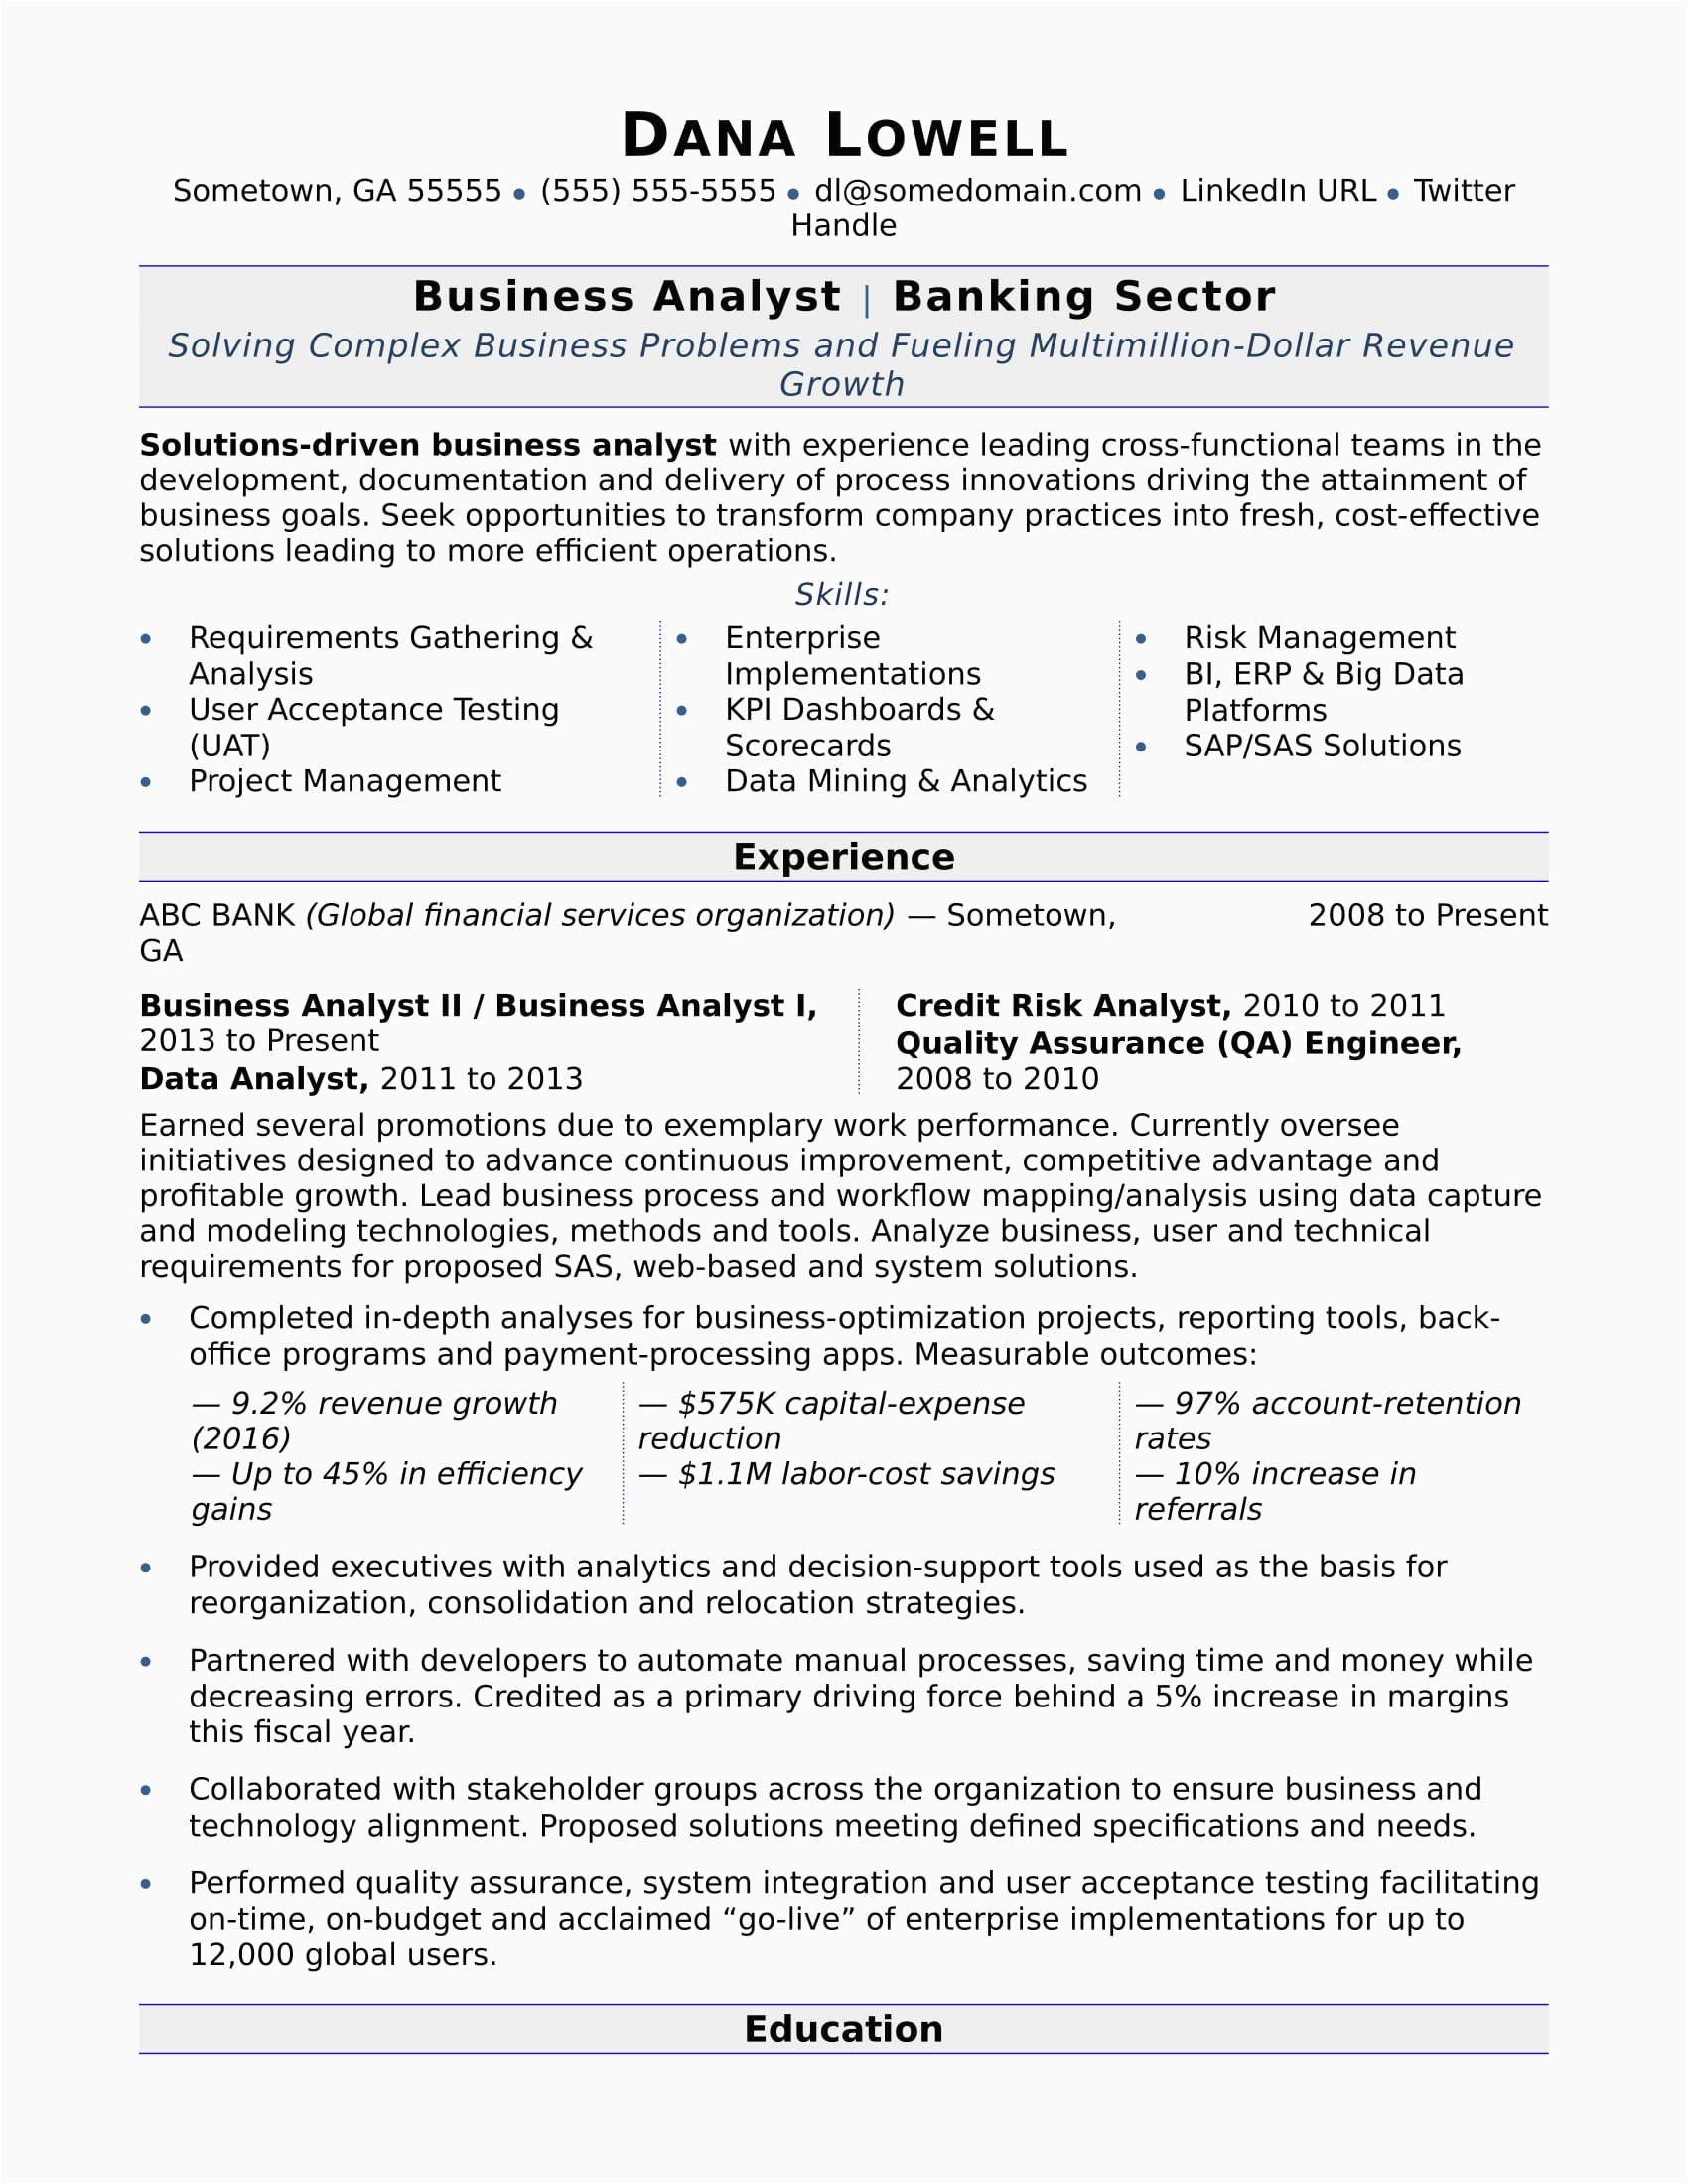 Business Analyst Payments Domain Sample Resume Business Analyst Resume Sample